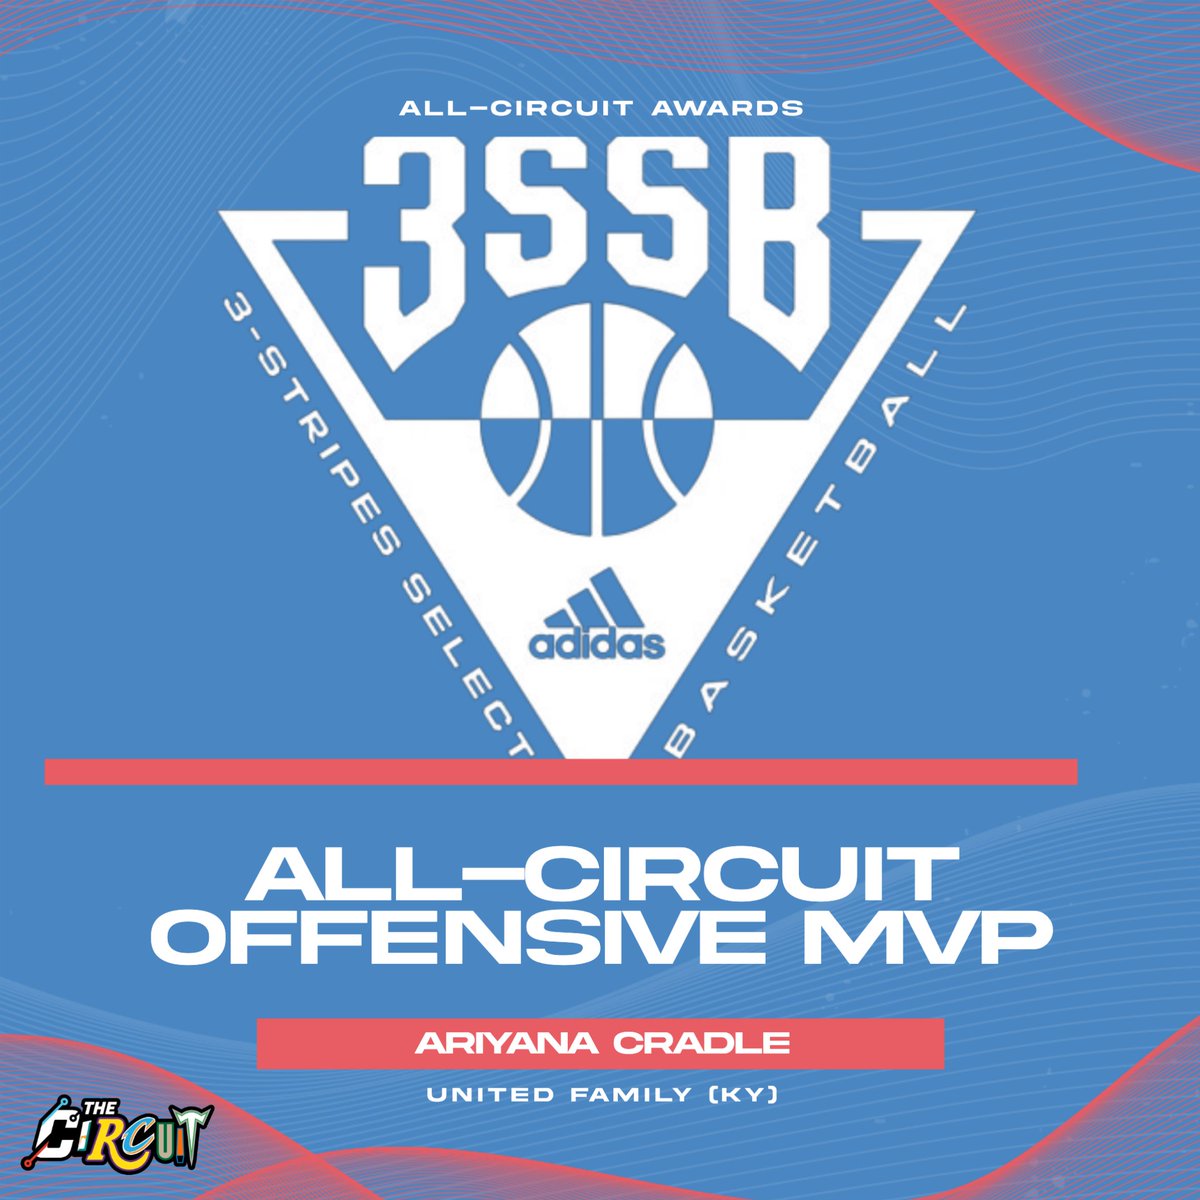 adidas 3SSB Session I | Offensive MVP 💰 Ariyana Cradle | United Family (OH) | 2026 Averages ➡️ 23.8 PPG, 5.3 APG, 1.5 SPG All-Circuit Awards ⤵️ thecircuithoops.com/news_article/s…